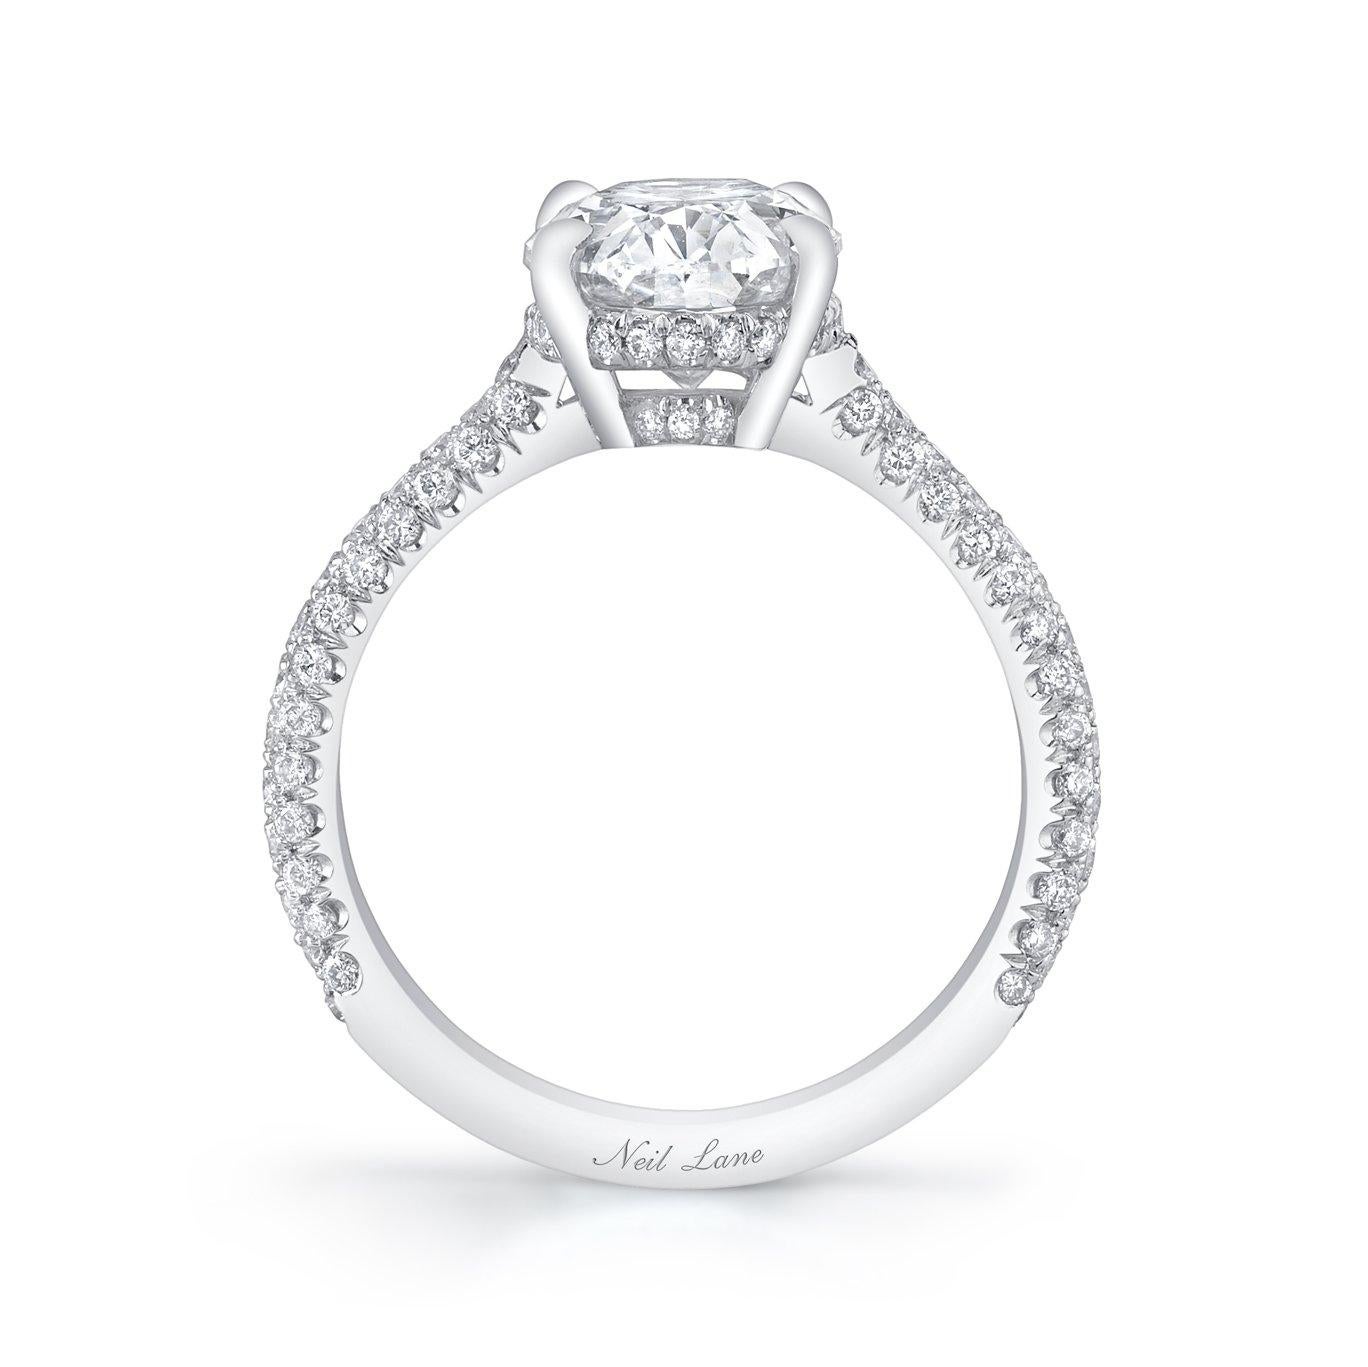 The elegant contour of this oval-shaped diamond is a perfect companion to this time honored solitaire ring, handmade in platinum, completed by one hundred twelve full-cut diamonds forming the three sided platinum shank, weighing a total of 0.48 ct.,